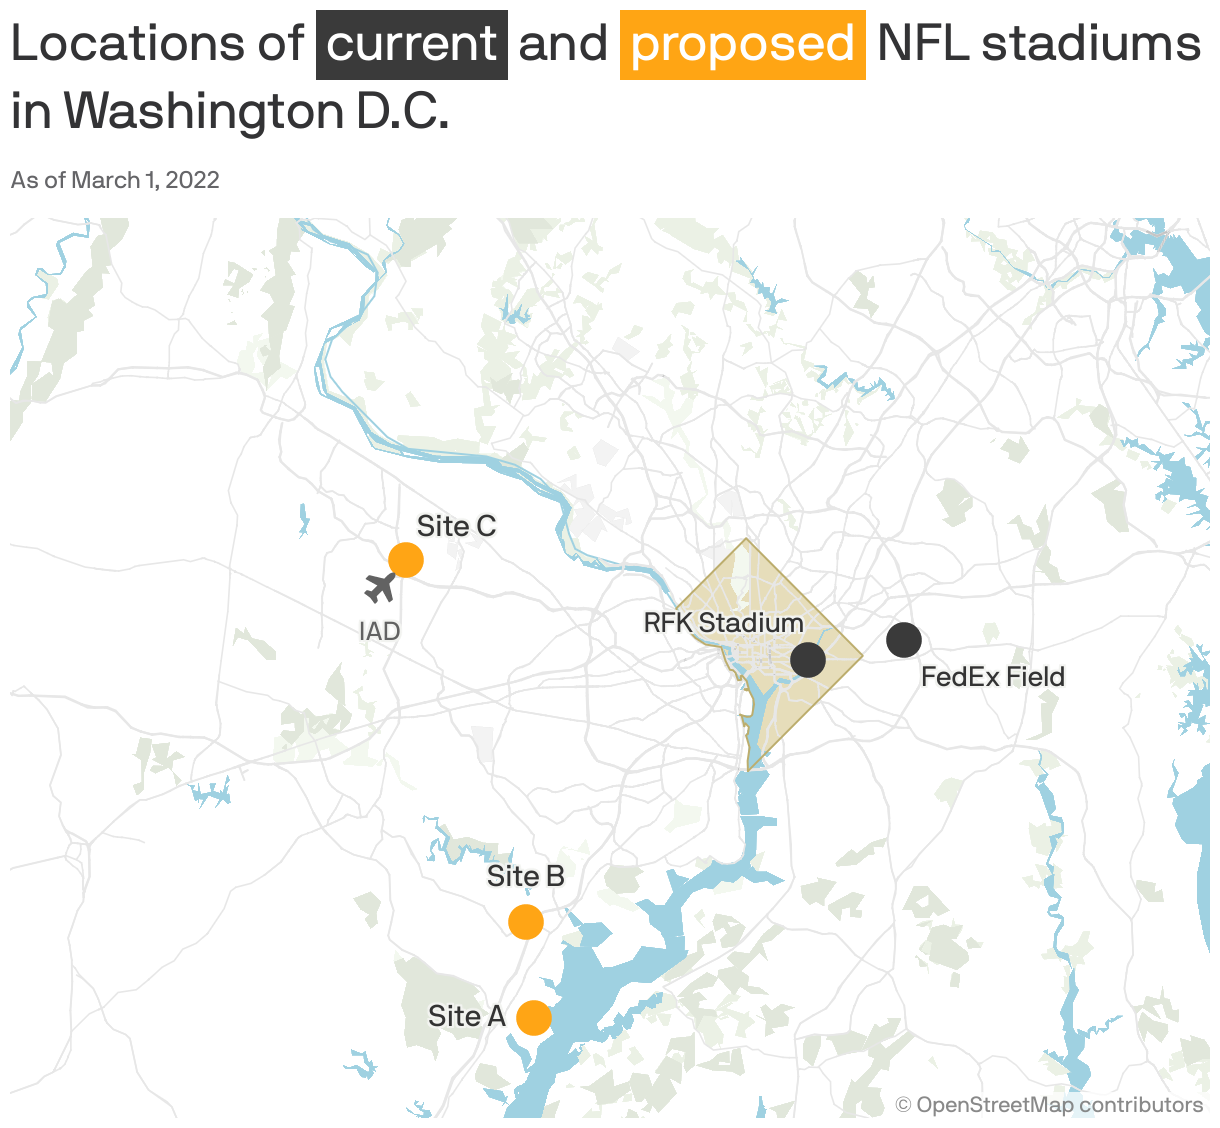 Locations of <span style="background: #3A3A3A; color: white; padding: 5px;">current</span> and <span style="background: #FFA514; color: white; padding: 5px;">proposed</span> NFL stadiums in Washington D.C.